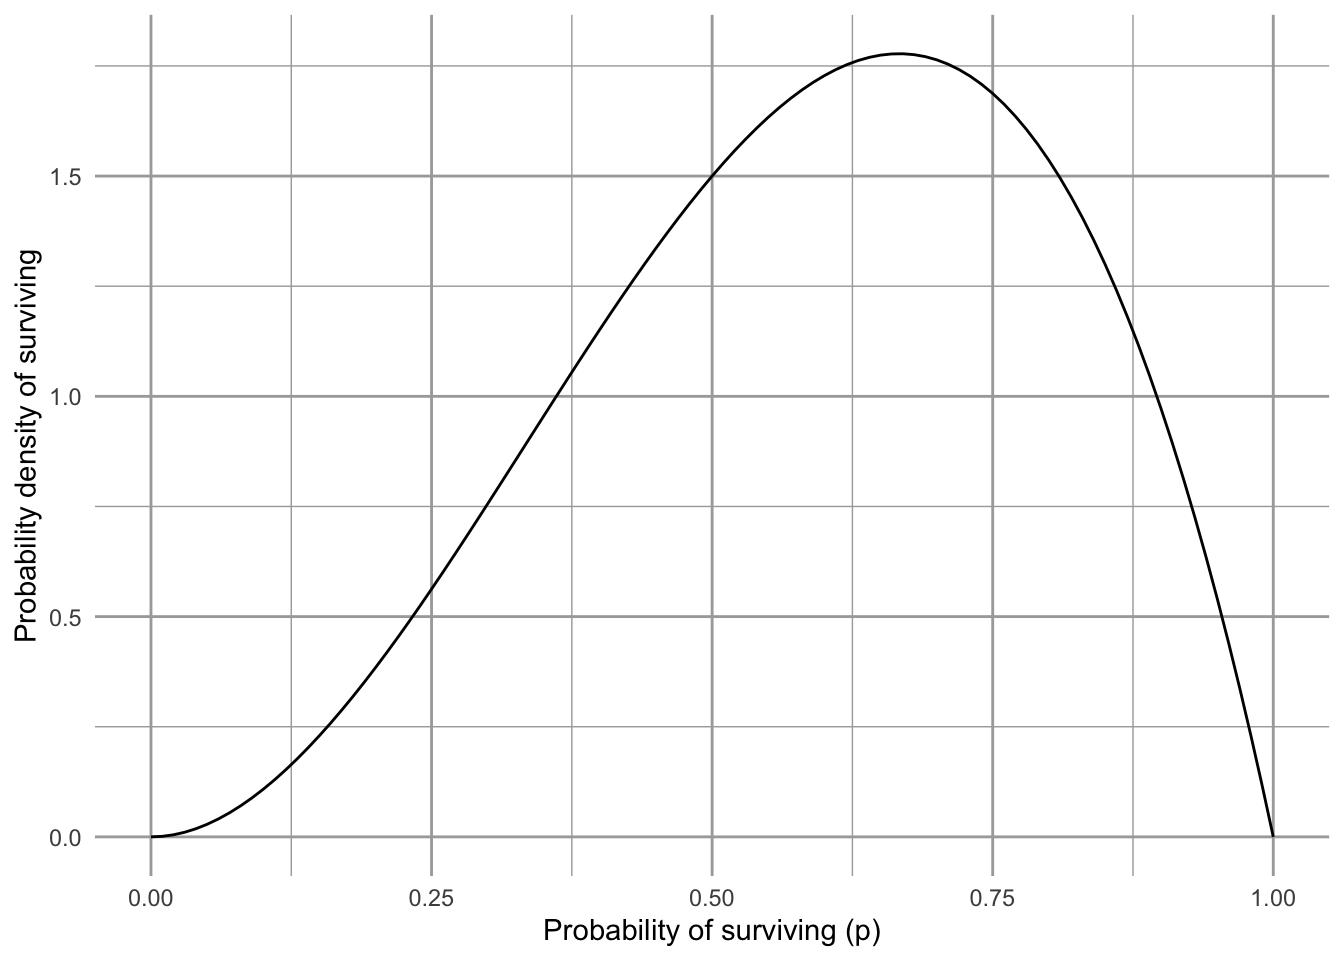 Our prior belief on the probability that the Song Sparrow population in Darrtown will replace itself over our time interval. We call this the *prior probability distribution.*